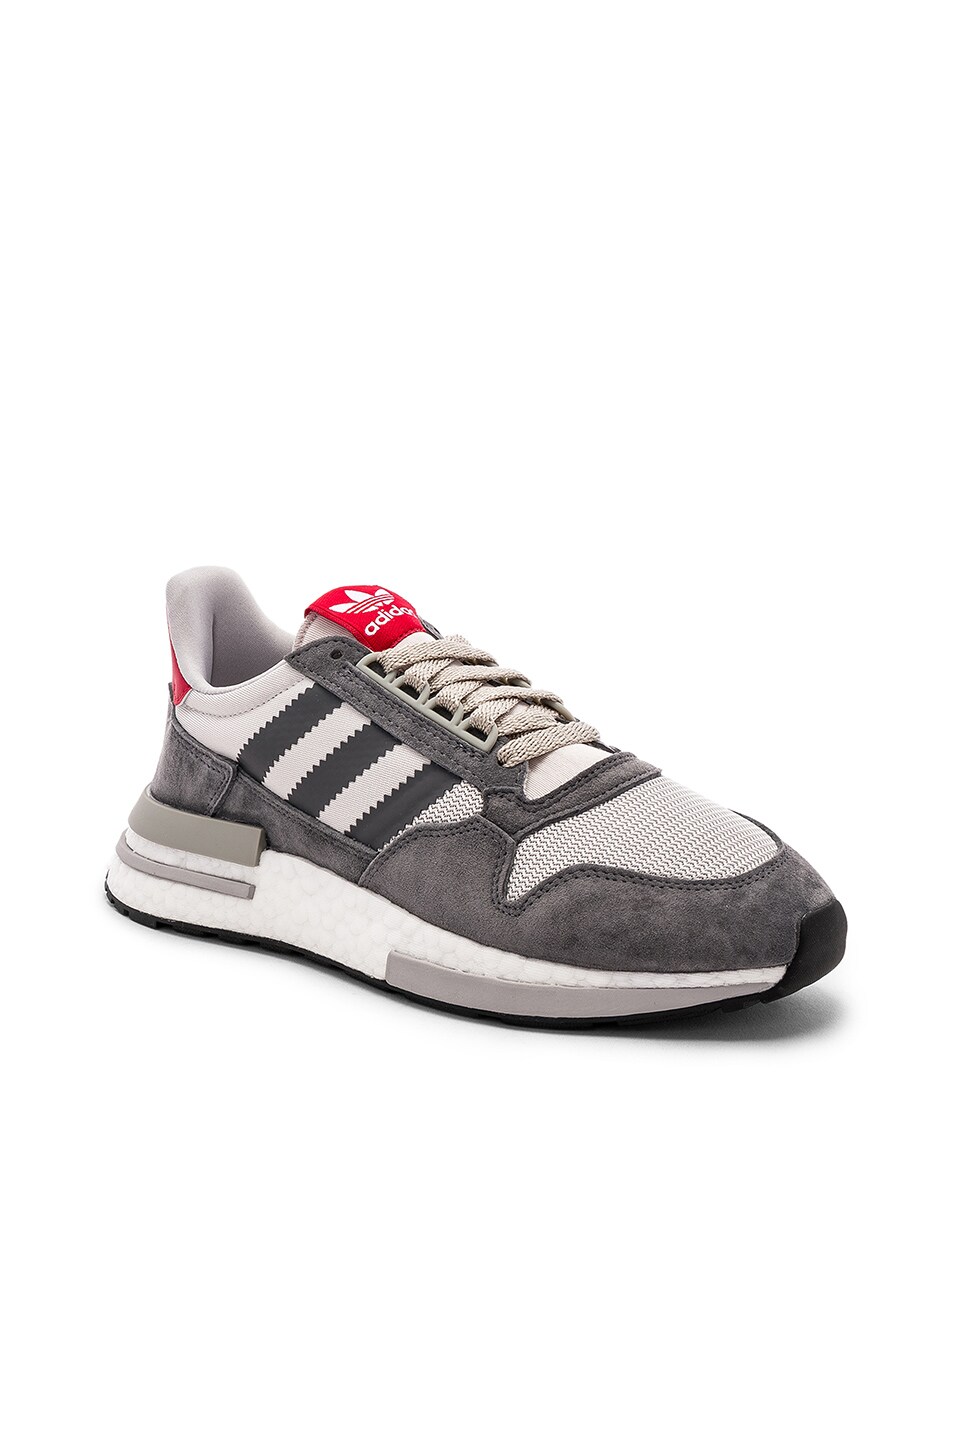 Image 1 of adidas Originals ZX 500 RM in Grey Four & White & Scarlet